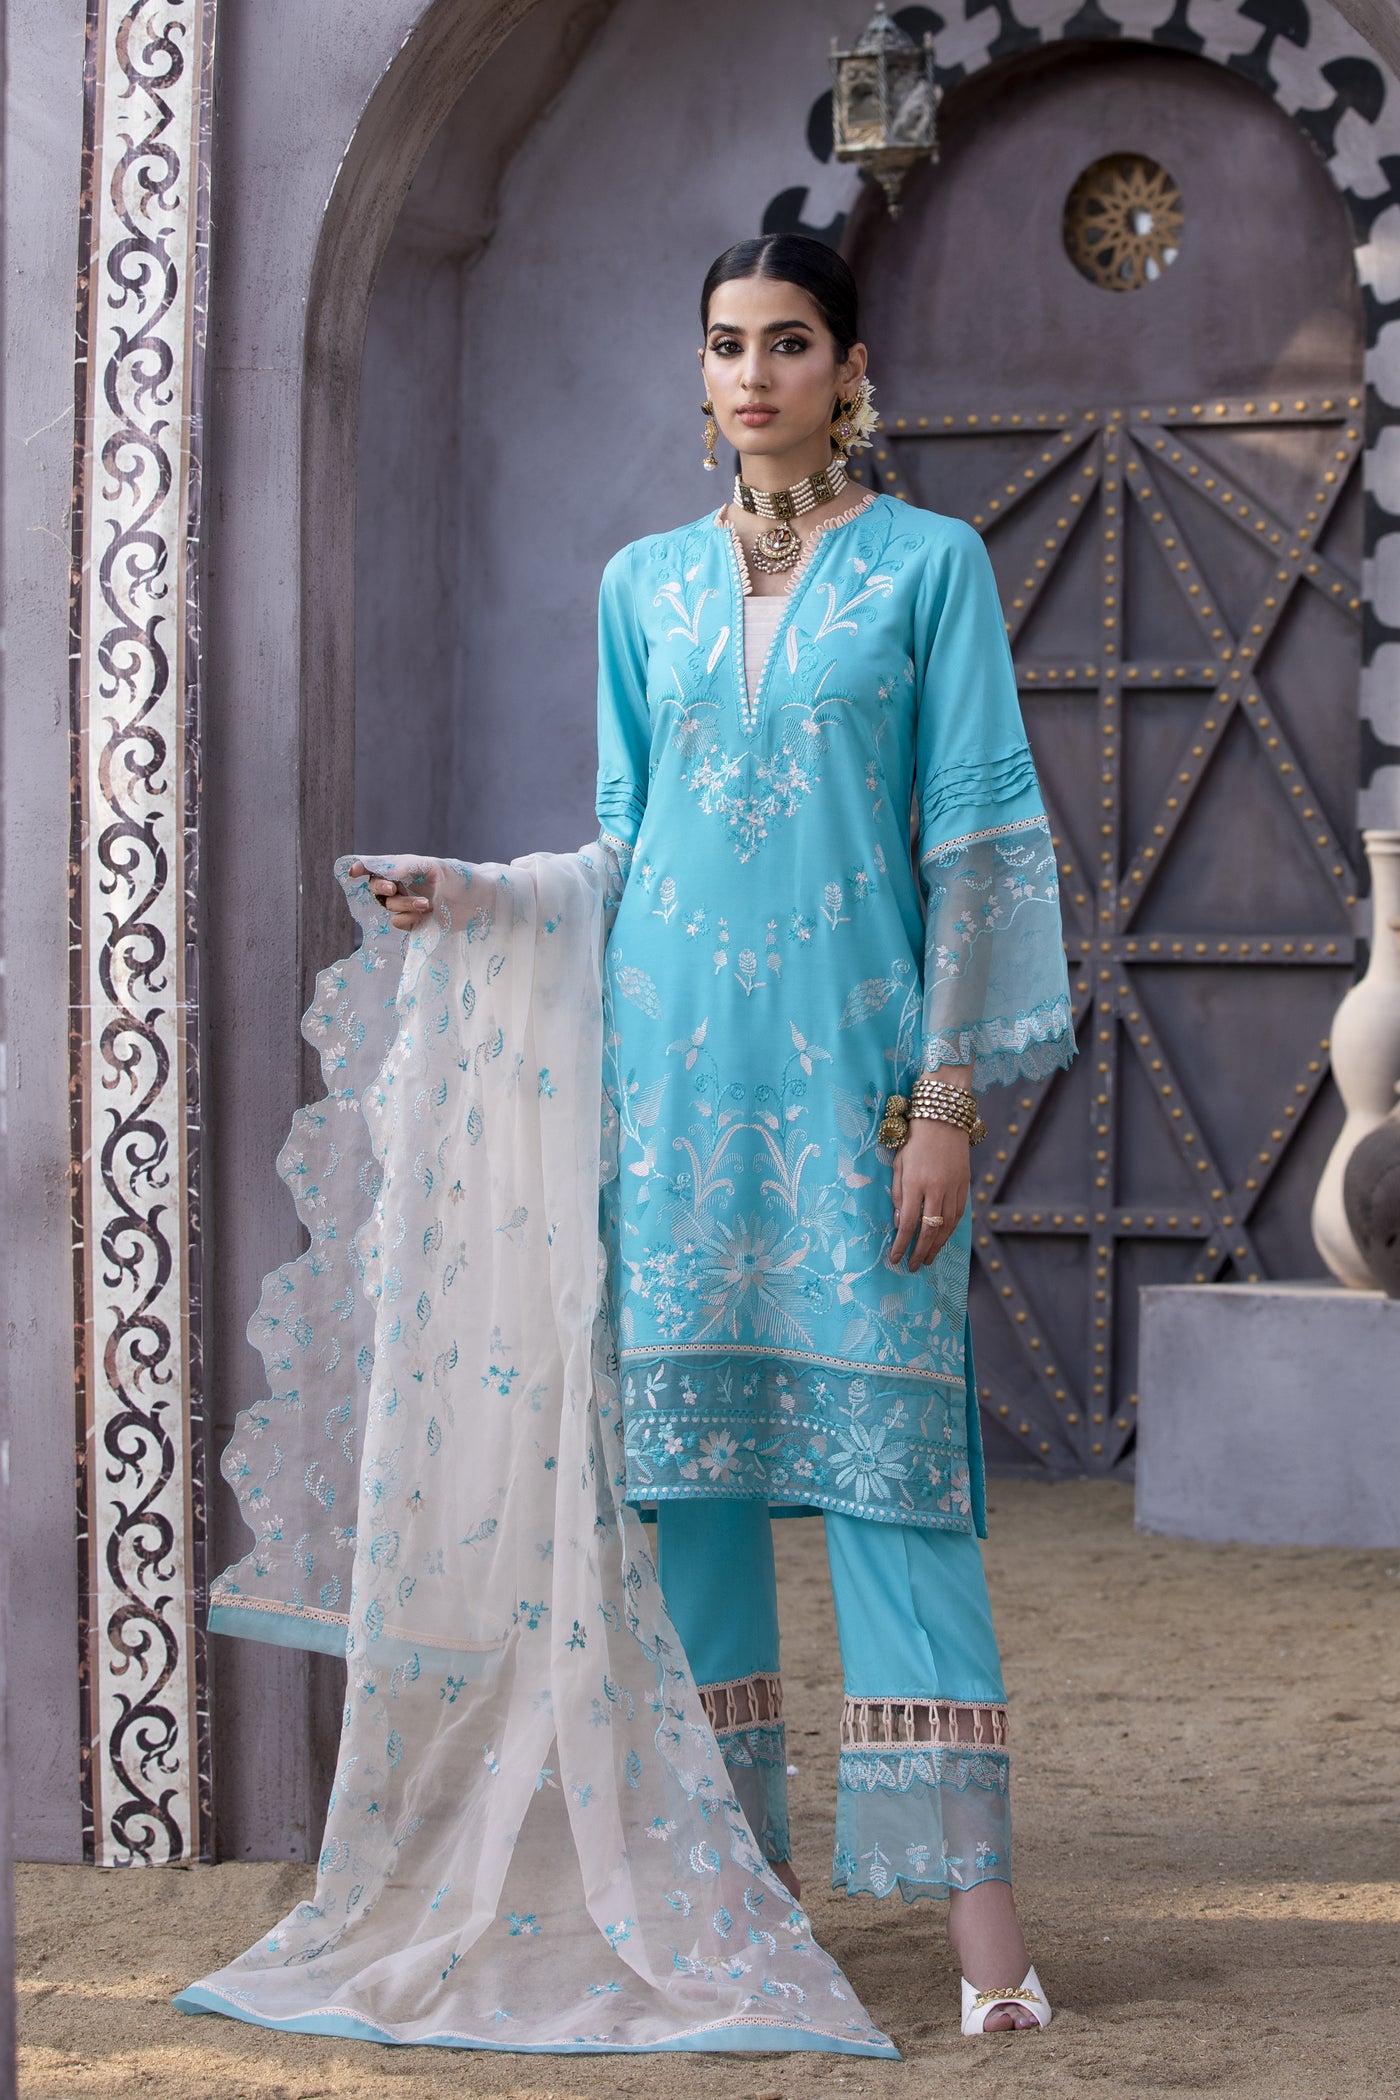 3 - Piece Embroidered Linen Suit